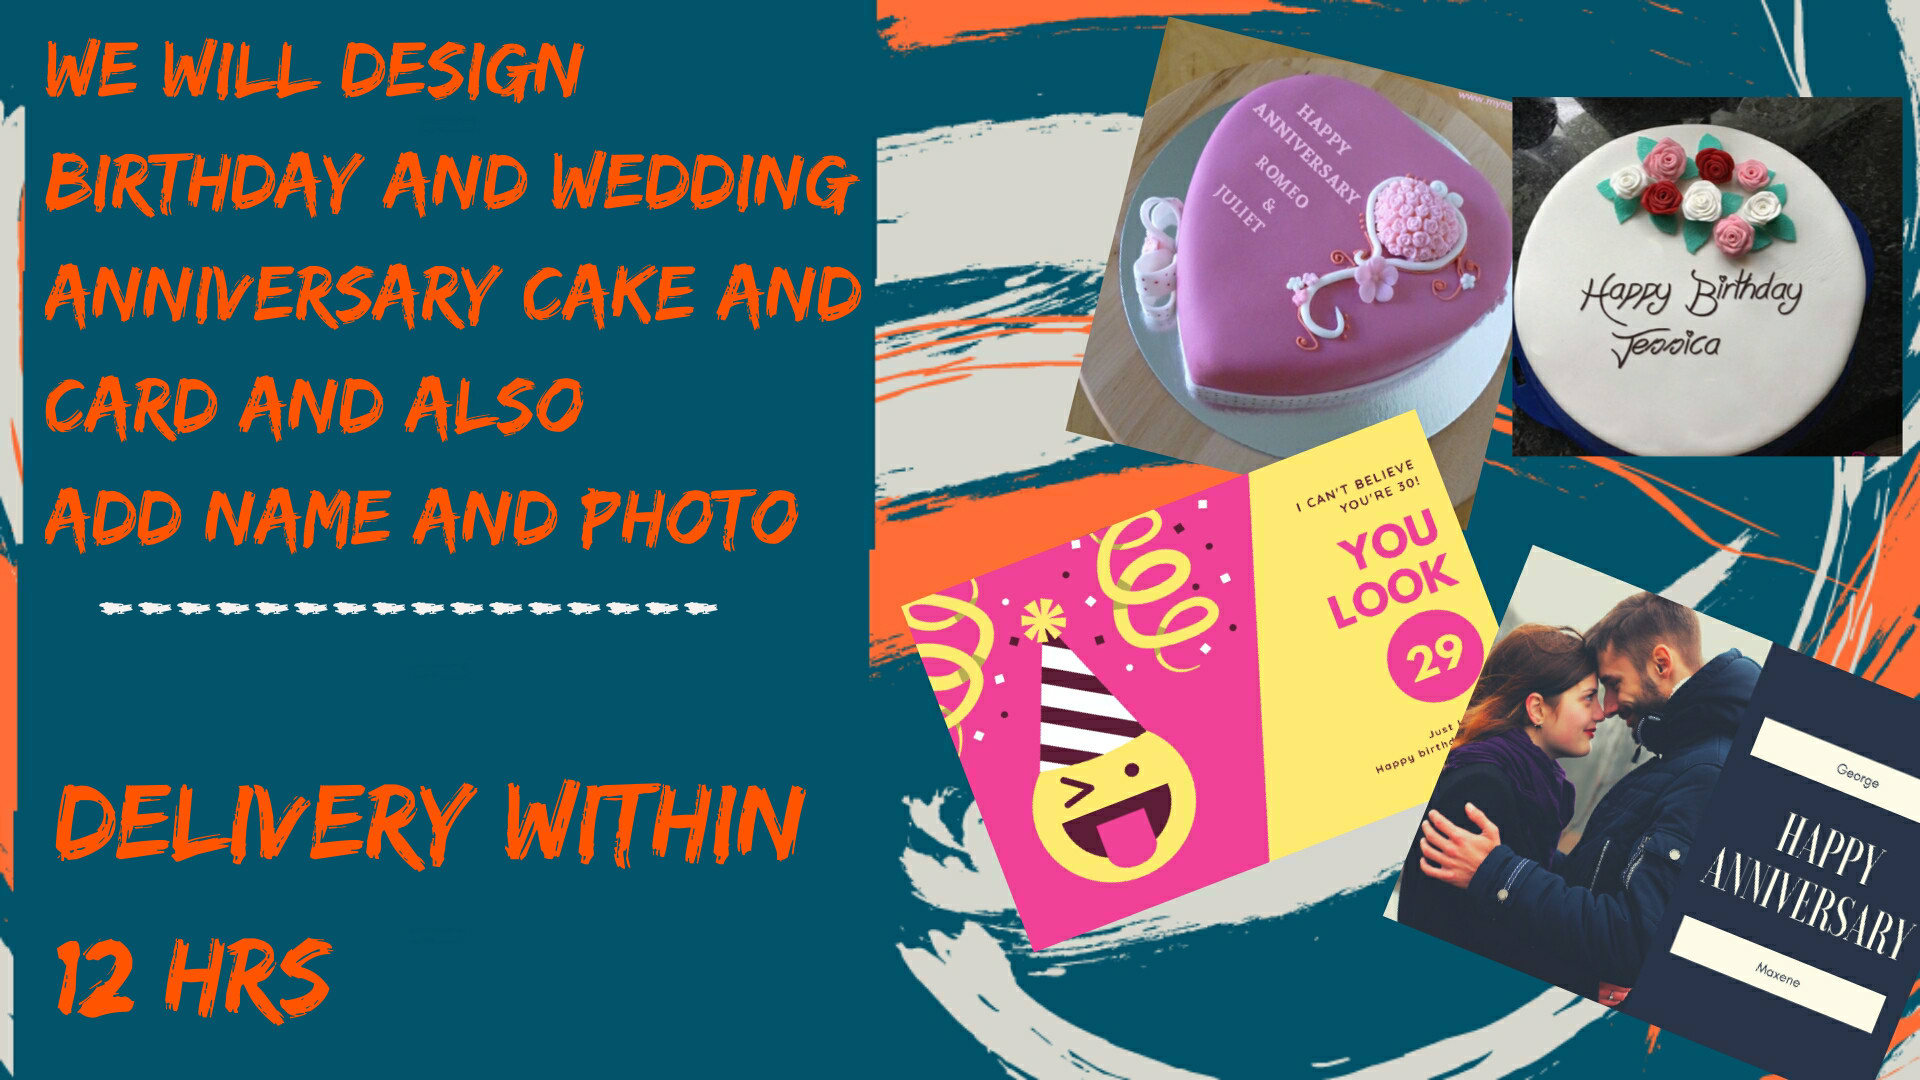 Design Birthday And Wedding Anniversary Cakes And Cards And Add Name And Photo By Zoom Maker Fiverr